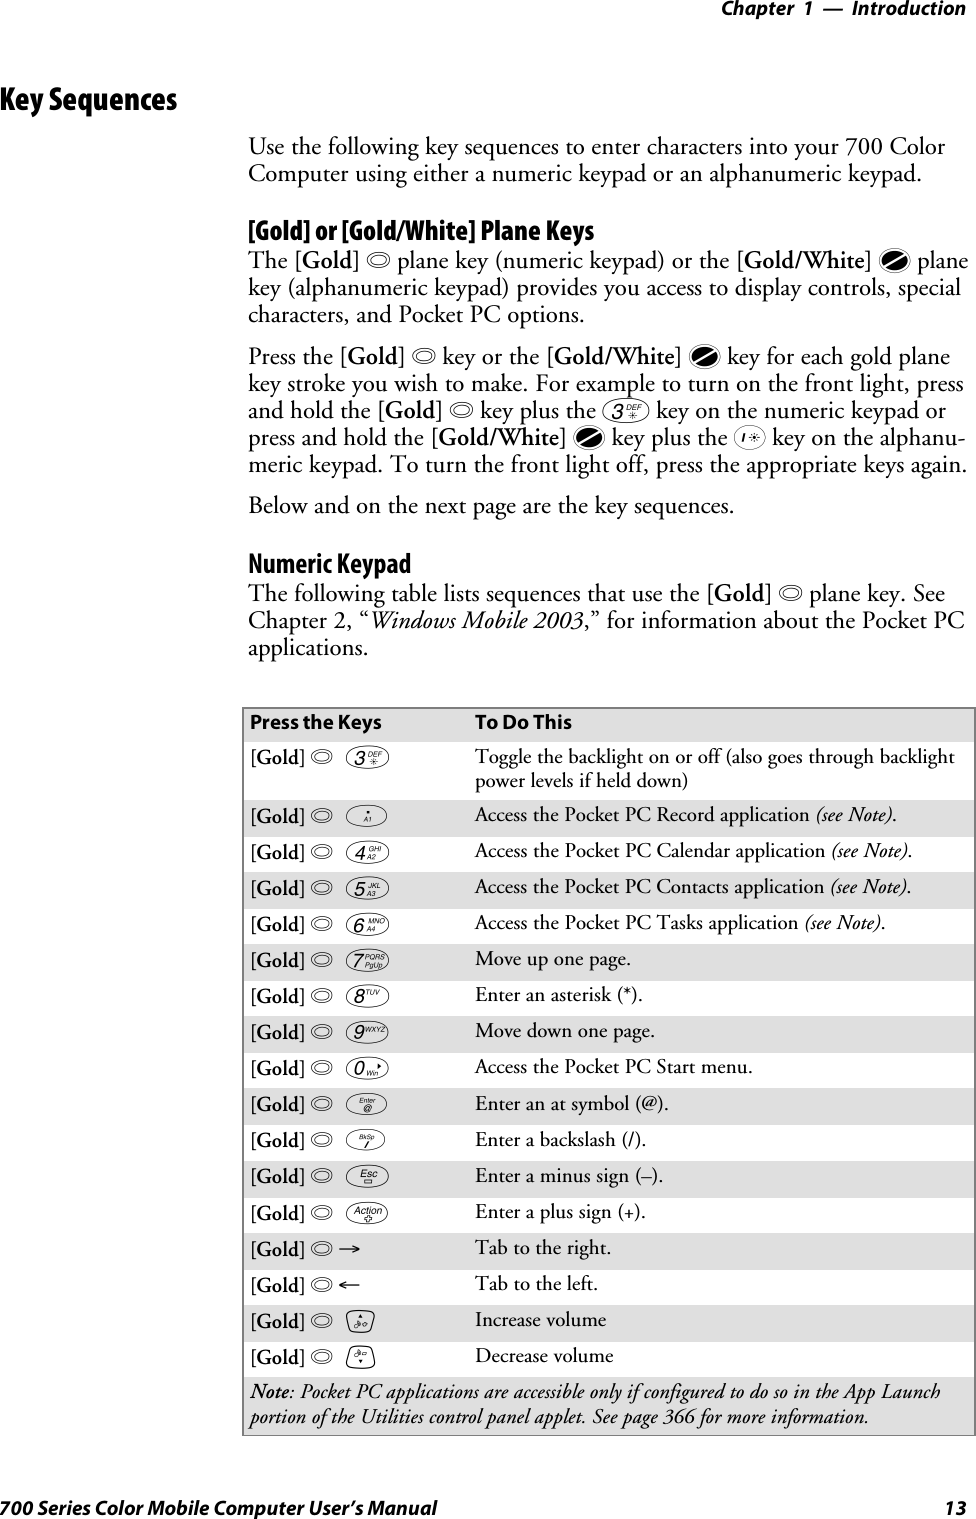 Introduction—Chapter 113700 Series Color Mobile Computer User’s ManualKey SequencesUse the following key sequences to enter characters into your 700 ColorComputer using either a numeric keypad or an alphanumeric keypad.[Gold] or [Gold/White] Plane KeysThe [Gold] bplane key (numeric keypad) or the [Gold/White] cplanekey (alphanumeric keypad) provides you access to display controls, specialcharacters, and Pocket PC options.Press the [Gold] bkey or the [Gold/White] ckey for each gold planekey stroke you wish to make. For example to turn on the front light, pressandholdthe[Gold] bkey plus the 3key on the numeric keypad orpress and hold the [Gold/White] ckey plus the Ikey on the alphanu-meric keypad. To turn the front light off, press the appropriate keys again.Belowandonthenextpagearethekeysequences.Numeric KeypadThe following table lists sequences that use the [Gold] bplane key. SeeChapter 2, “Windows Mobile 2003,” for information about the Pocket PCapplications.Press the Keys To Do This[Gold]b3Toggle the backlight on or off (also goes through backlightpower levels if held down)[Gold]baAccess the Pocket PC Record application (see Note).[Gold]b4Access the Pocket PC Calendar application (see Note).[Gold]b5Access the Pocket PC Contacts application (see Note).[Gold]b6Access the Pocket PC Tasks application (see Note).[Gold]b7Move up one page.[Gold]b8Enter an asterisk (*).[Gold]b9Move down one page.[Gold]b0Access the Pocket PC Start menu.[Gold]beEnter an at symbol (@).[Gold]bKEnter a backslash (/).[Gold]bEEnter a minus sign (–).[Gold]bAEnter a plus sign (+).[Gold]b→Tab to the right.[Gold]b←Tab to the left.[Gold]bUIncrease volume[Gold]bDDecrease volumeNote: Pocket PC applications are accessible only if configured to do so in the App Launchportion of the Utilities control panel applet. See page 366 for more information.